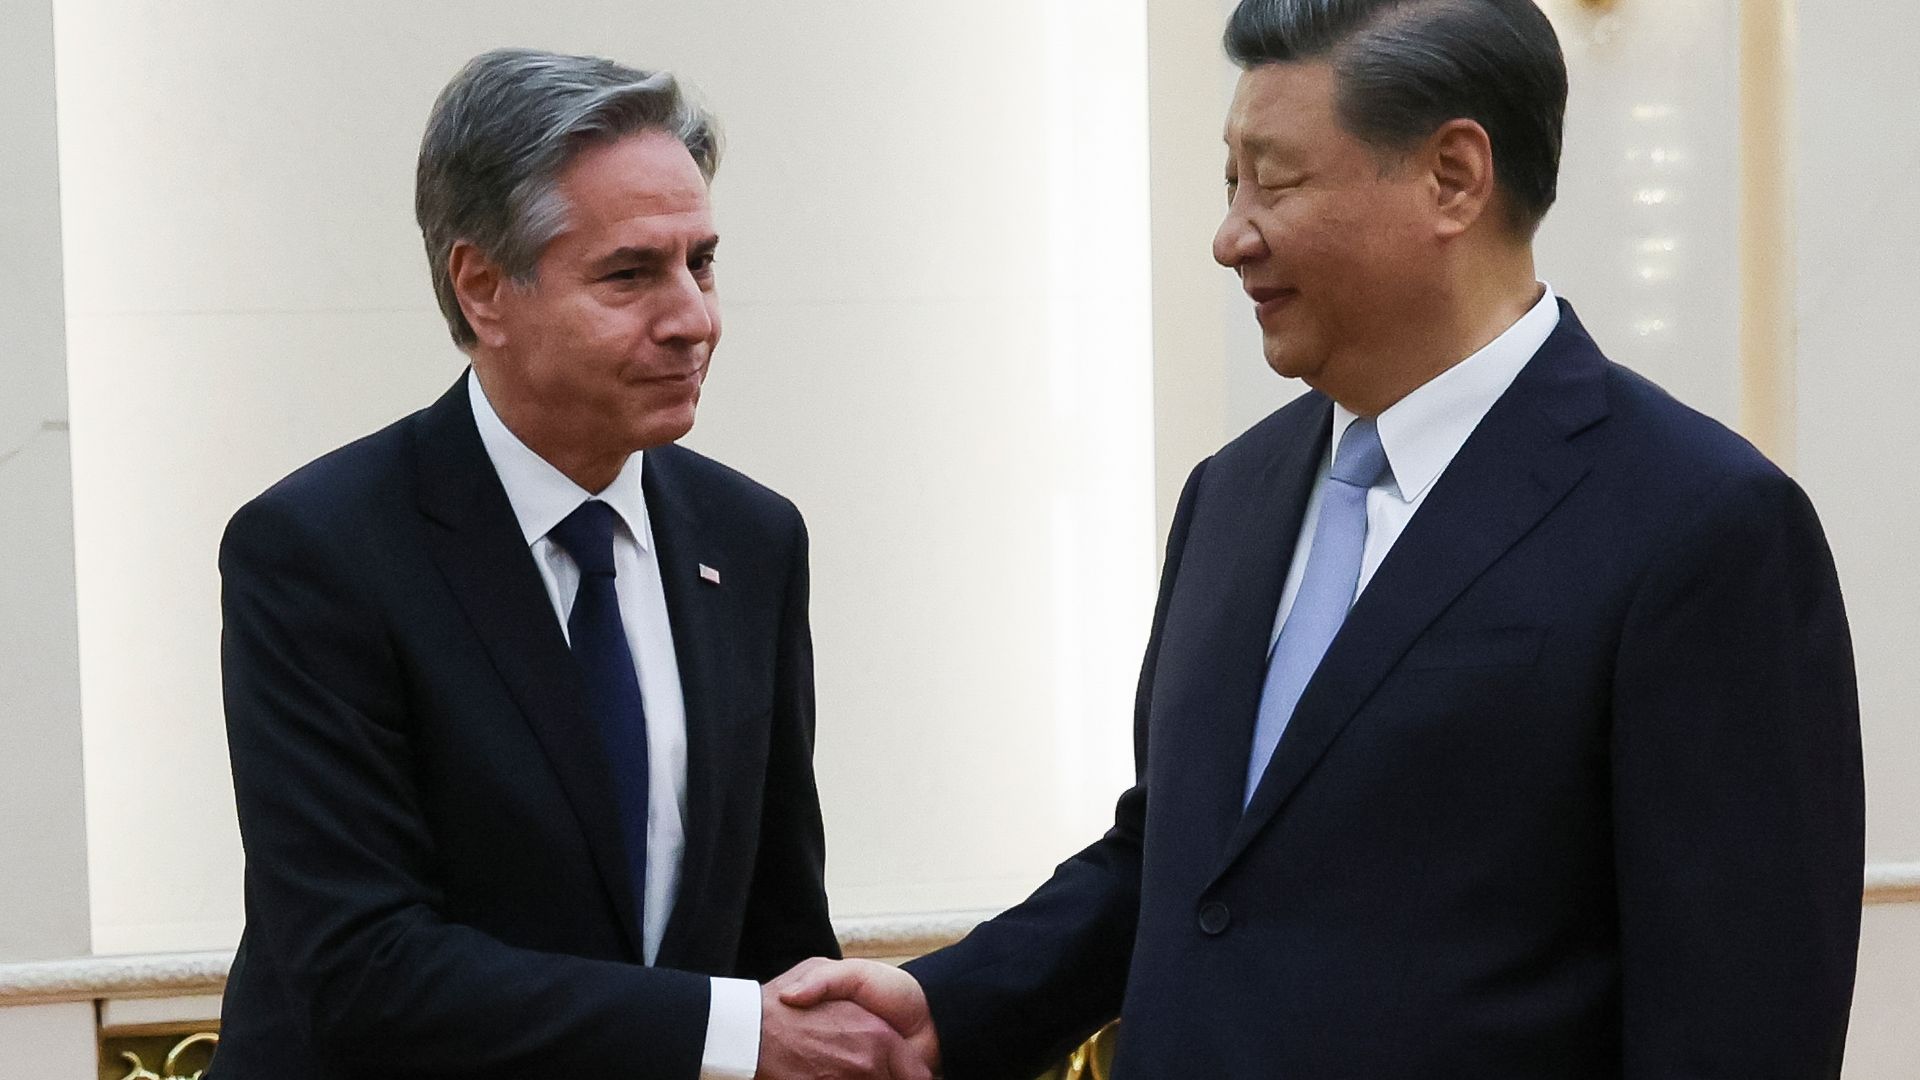 U.S. Secretary of State Anthony Blinken met with Chinese president Xi Jinping to improve the relationship between the two nations.